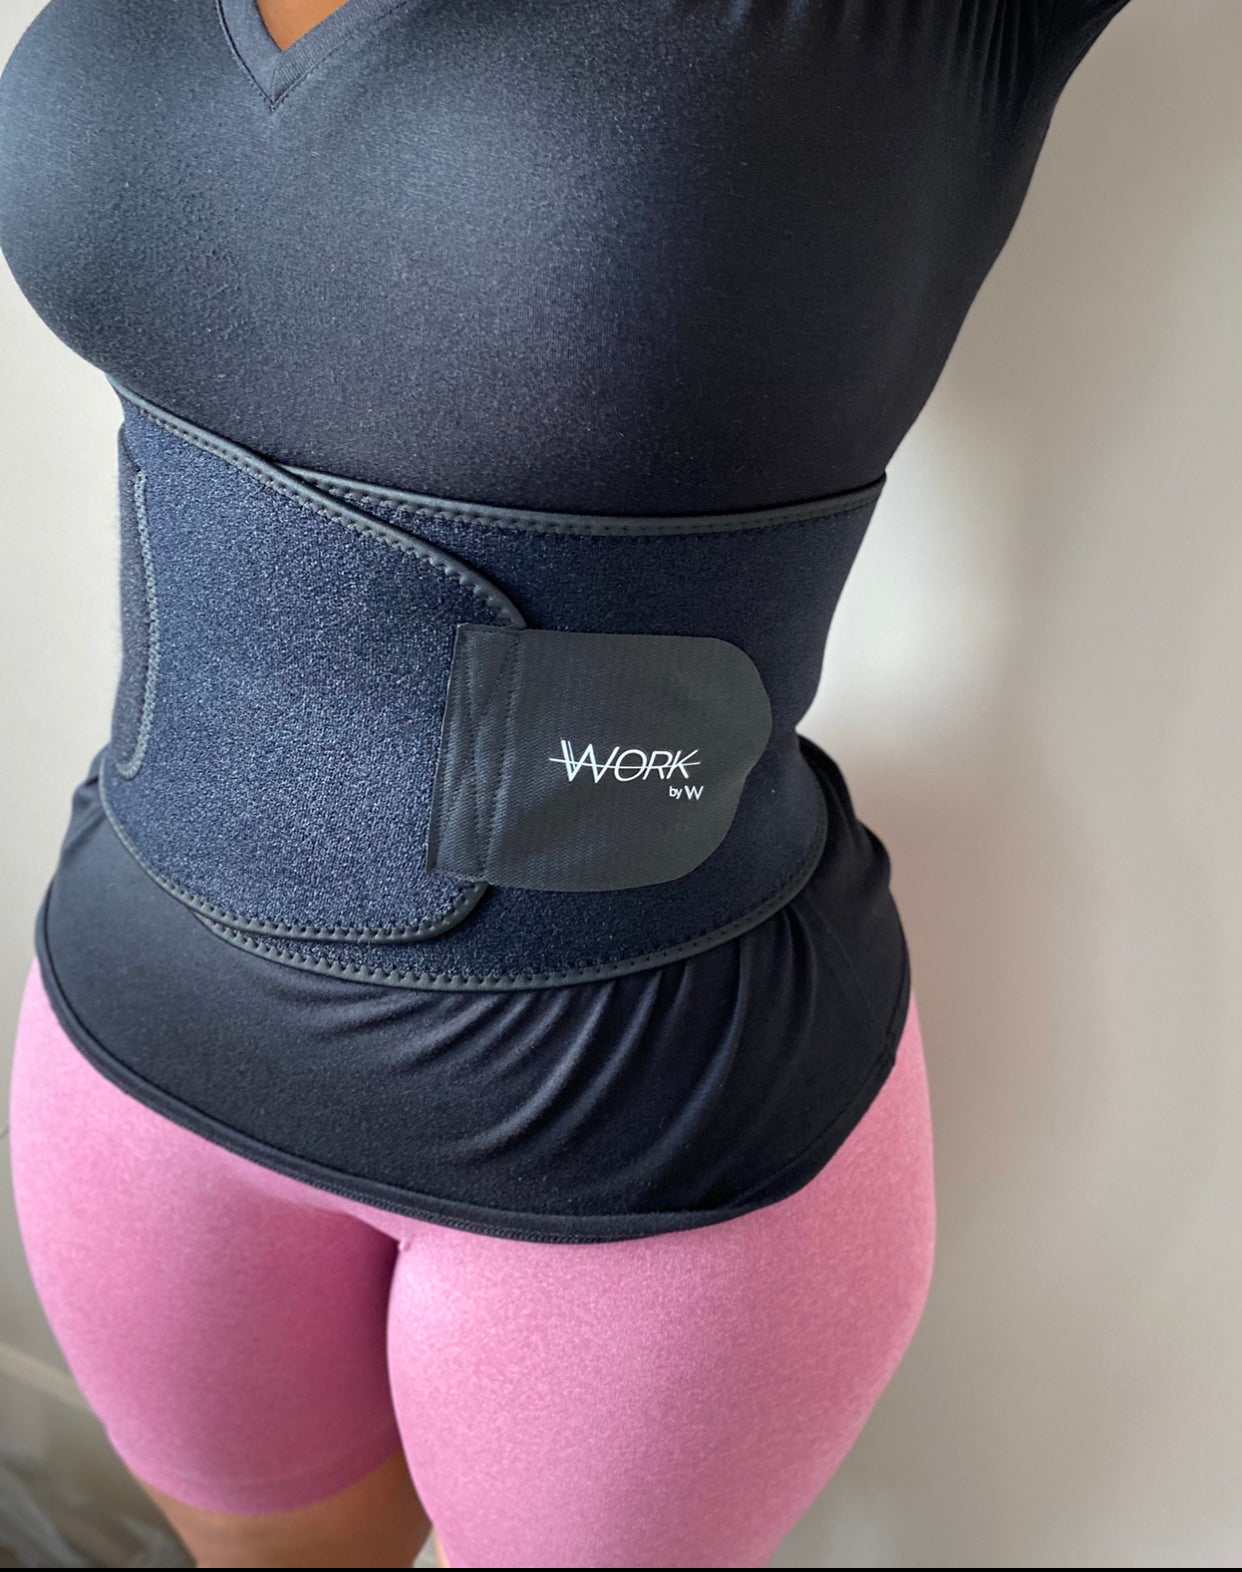 Sweat waist belt for gym workouts for men and women – W by Crystal White